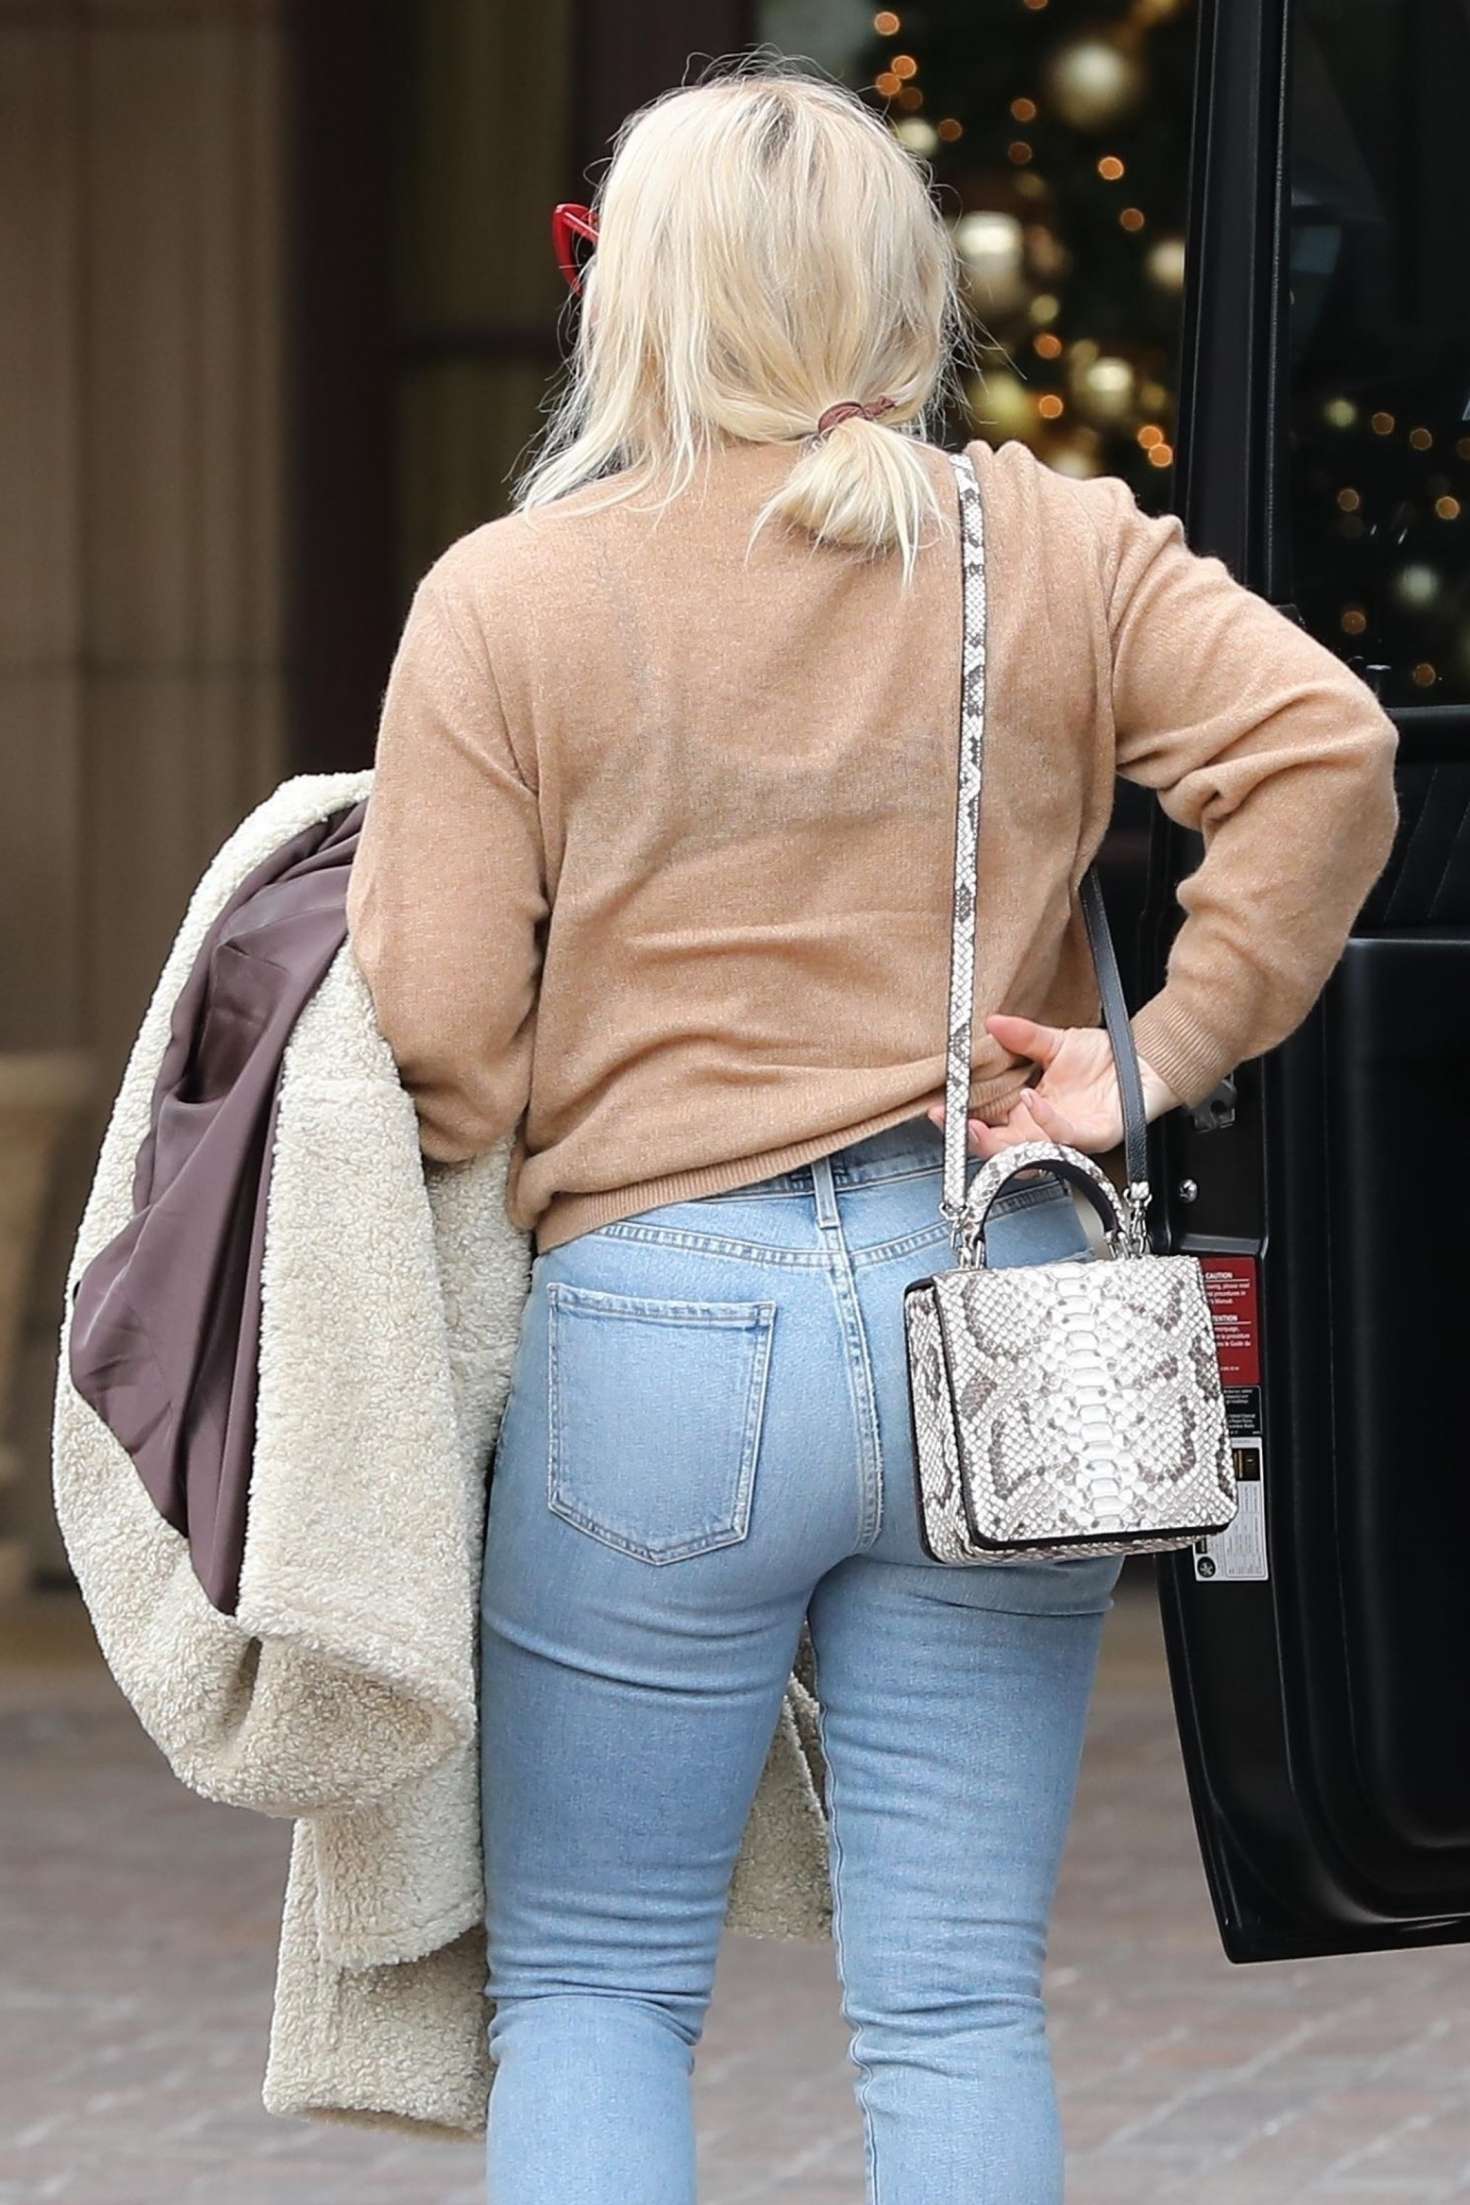 Hilary Duff in Tight Jeans â€“ Out in Beverly Hills